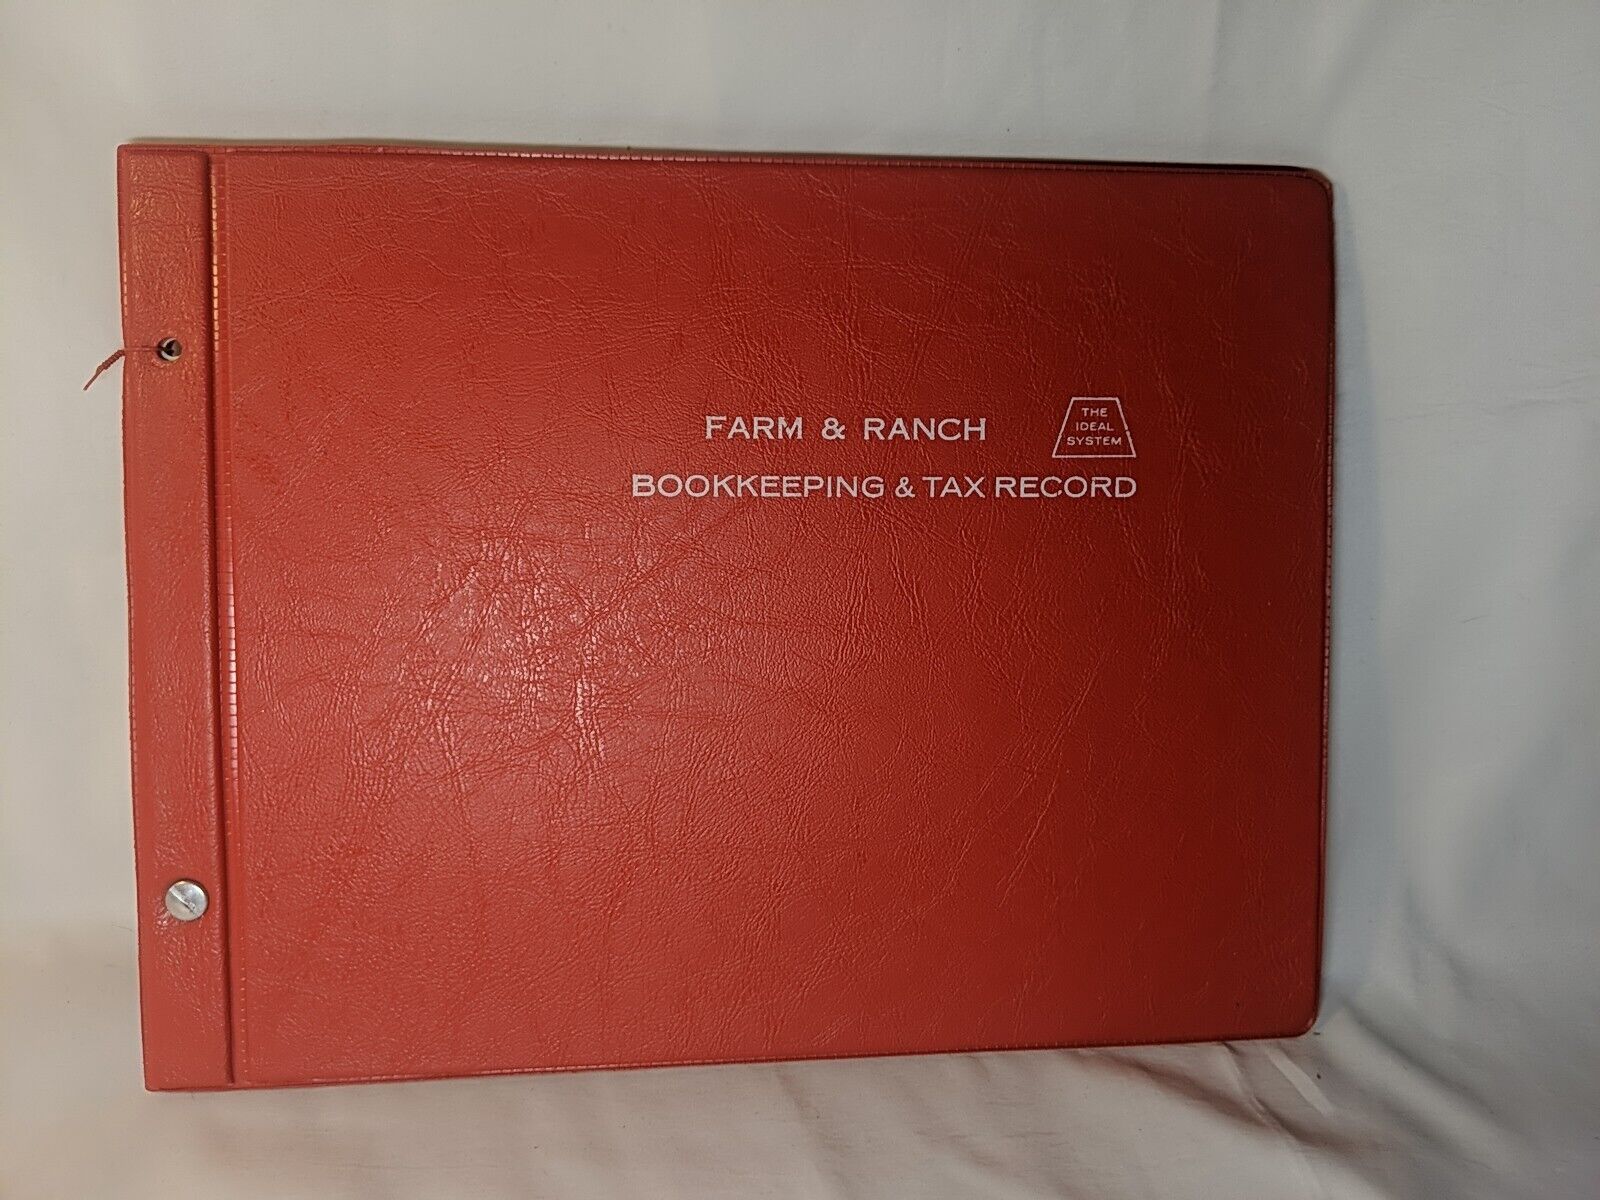 The Ideal System Farm & Ranch Bookkeeping & Tax Record Red 1964 Vintage